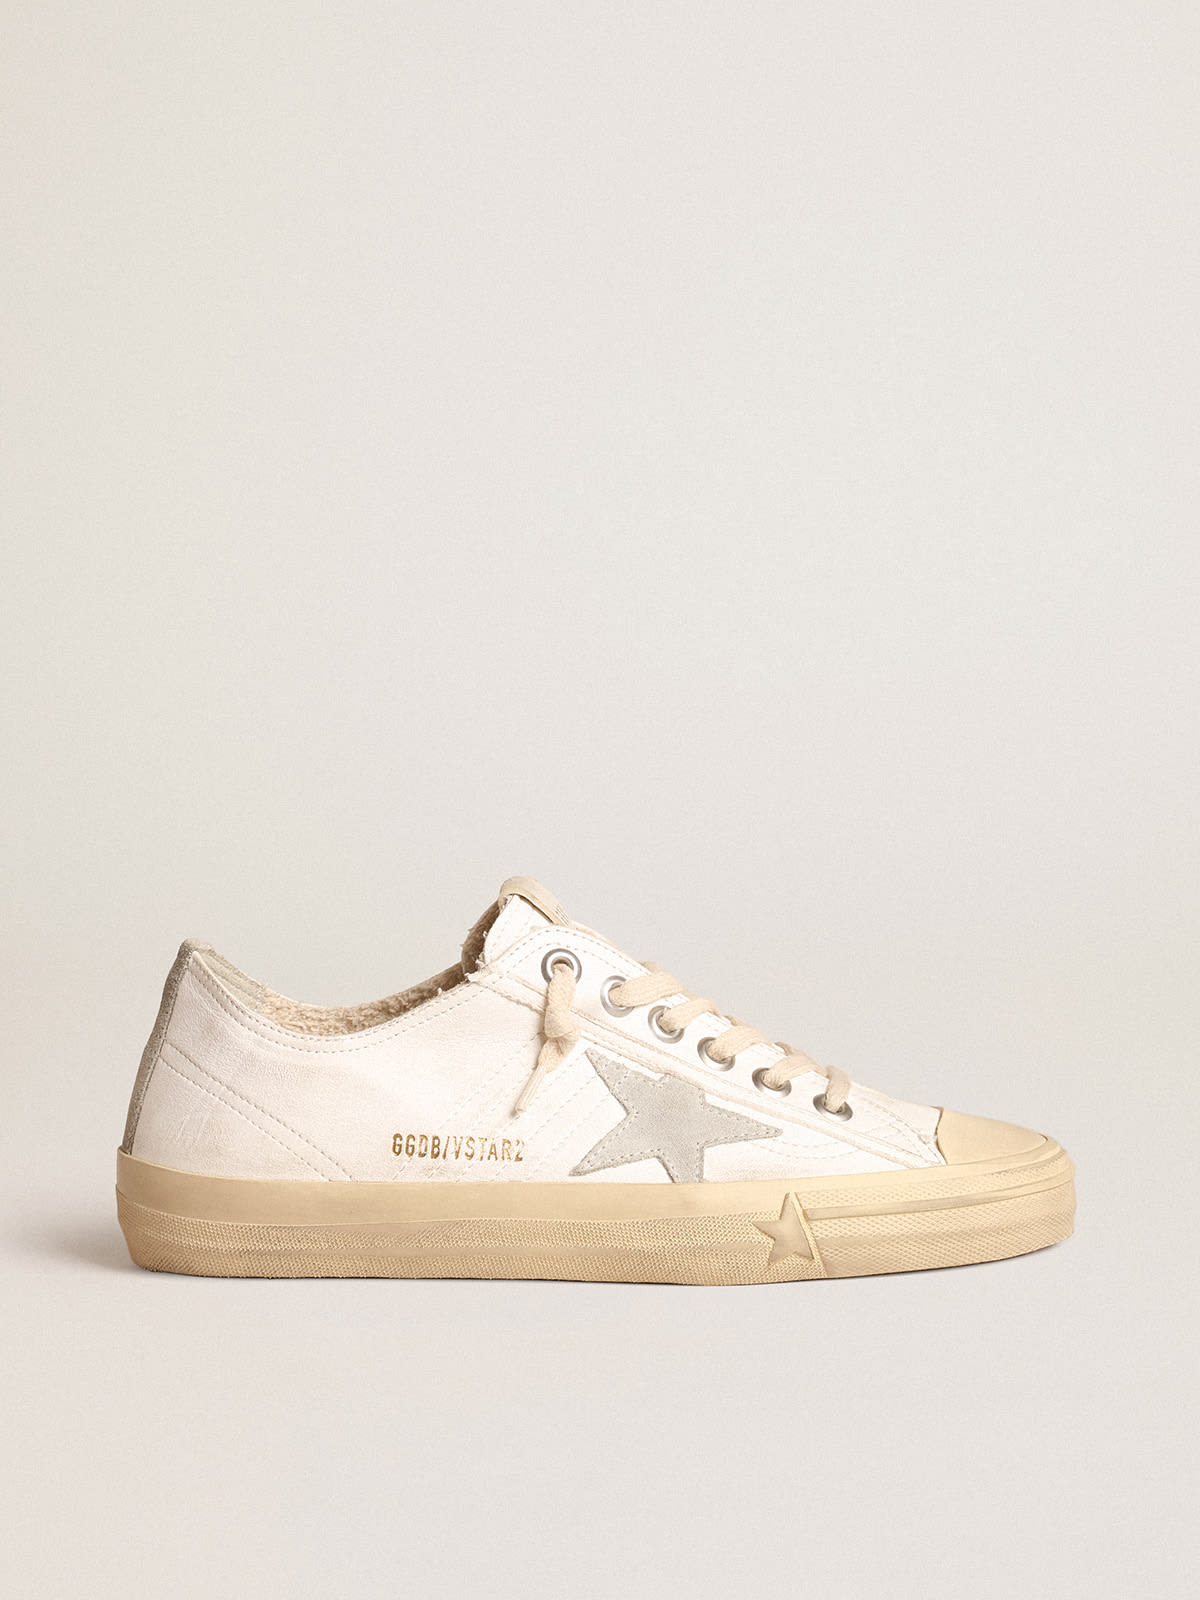 V-Star in nappa leather with ice-gray suede star and heel tab | Golden Goose